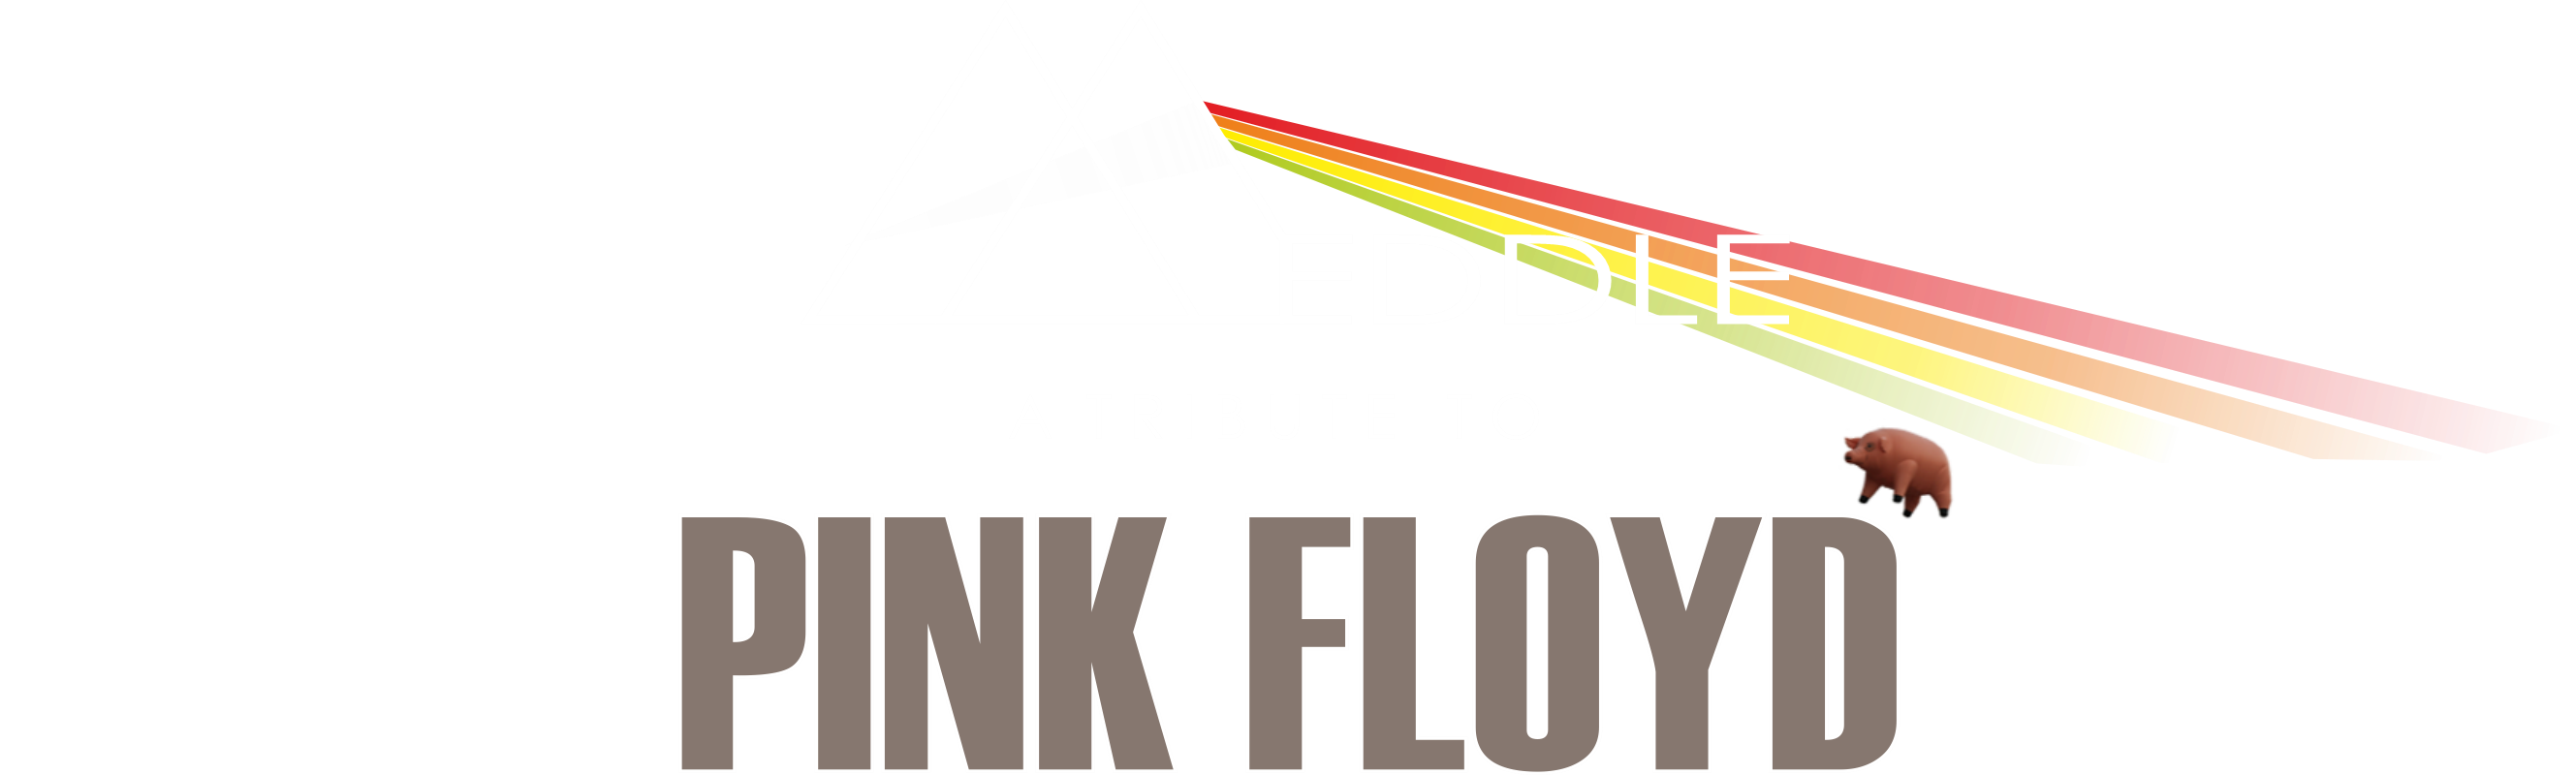 Meddle - A Tribute To Pink Floyd - Logo